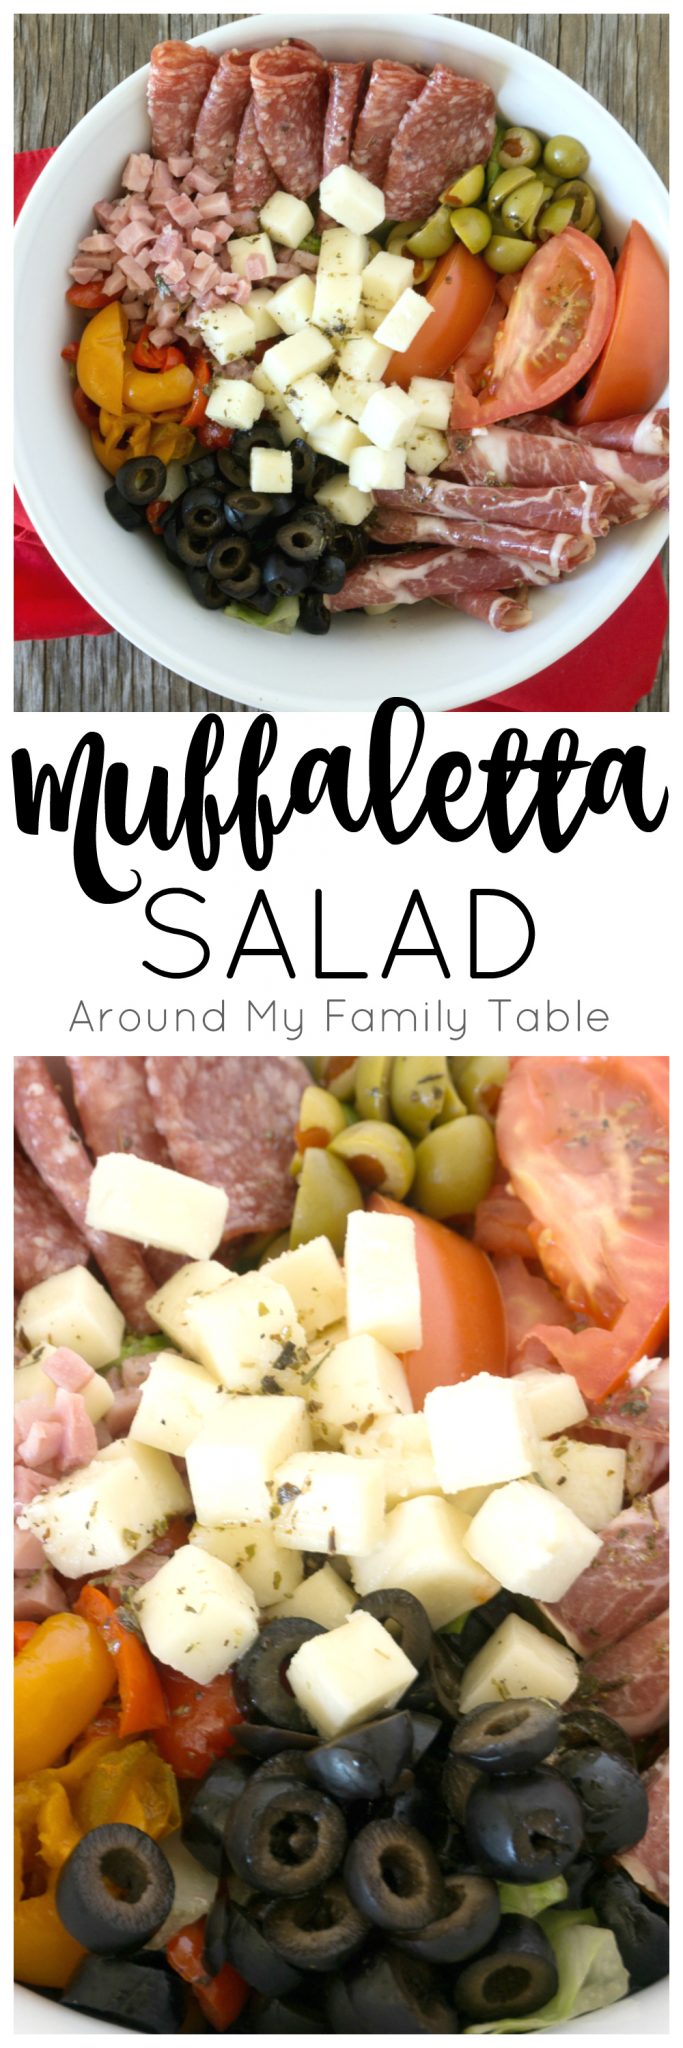 There is nothing better for supper on a hot evening than a delicious salad. This Muffaletta Salad has all the flavors you expect in the traditional sandwich, but in salad form! via @slingmama